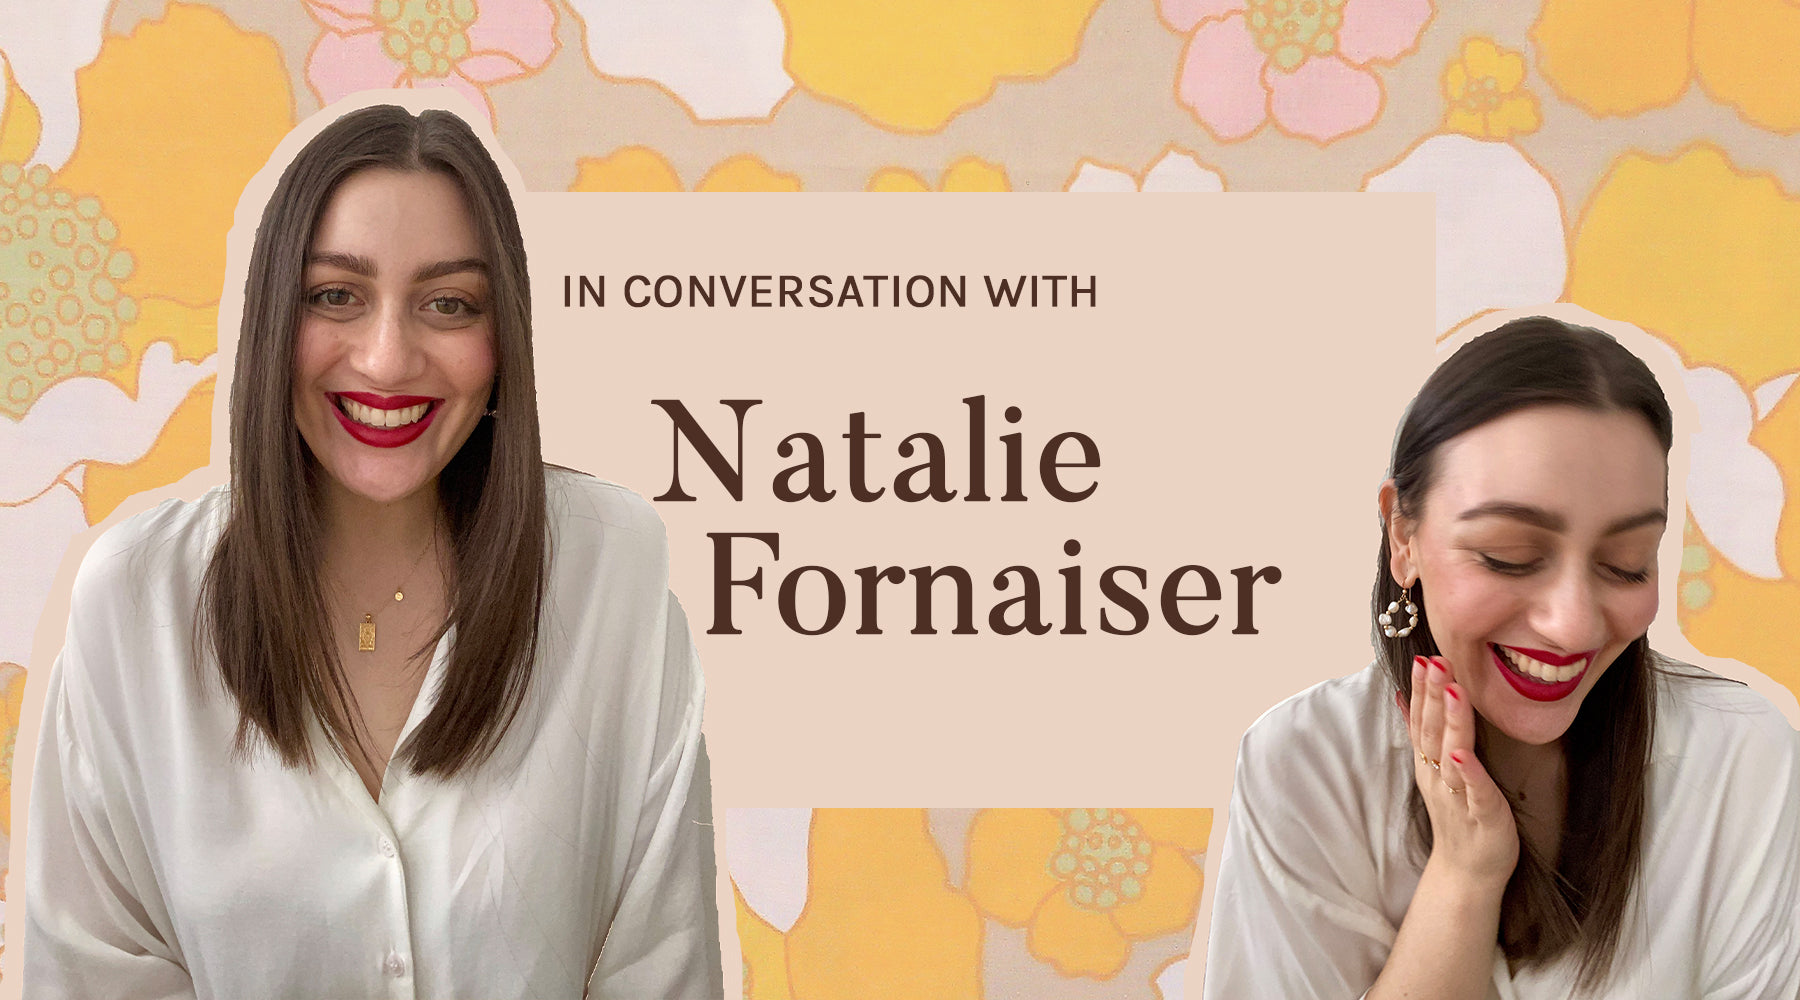 In conversation with - Natalie Fornaiser